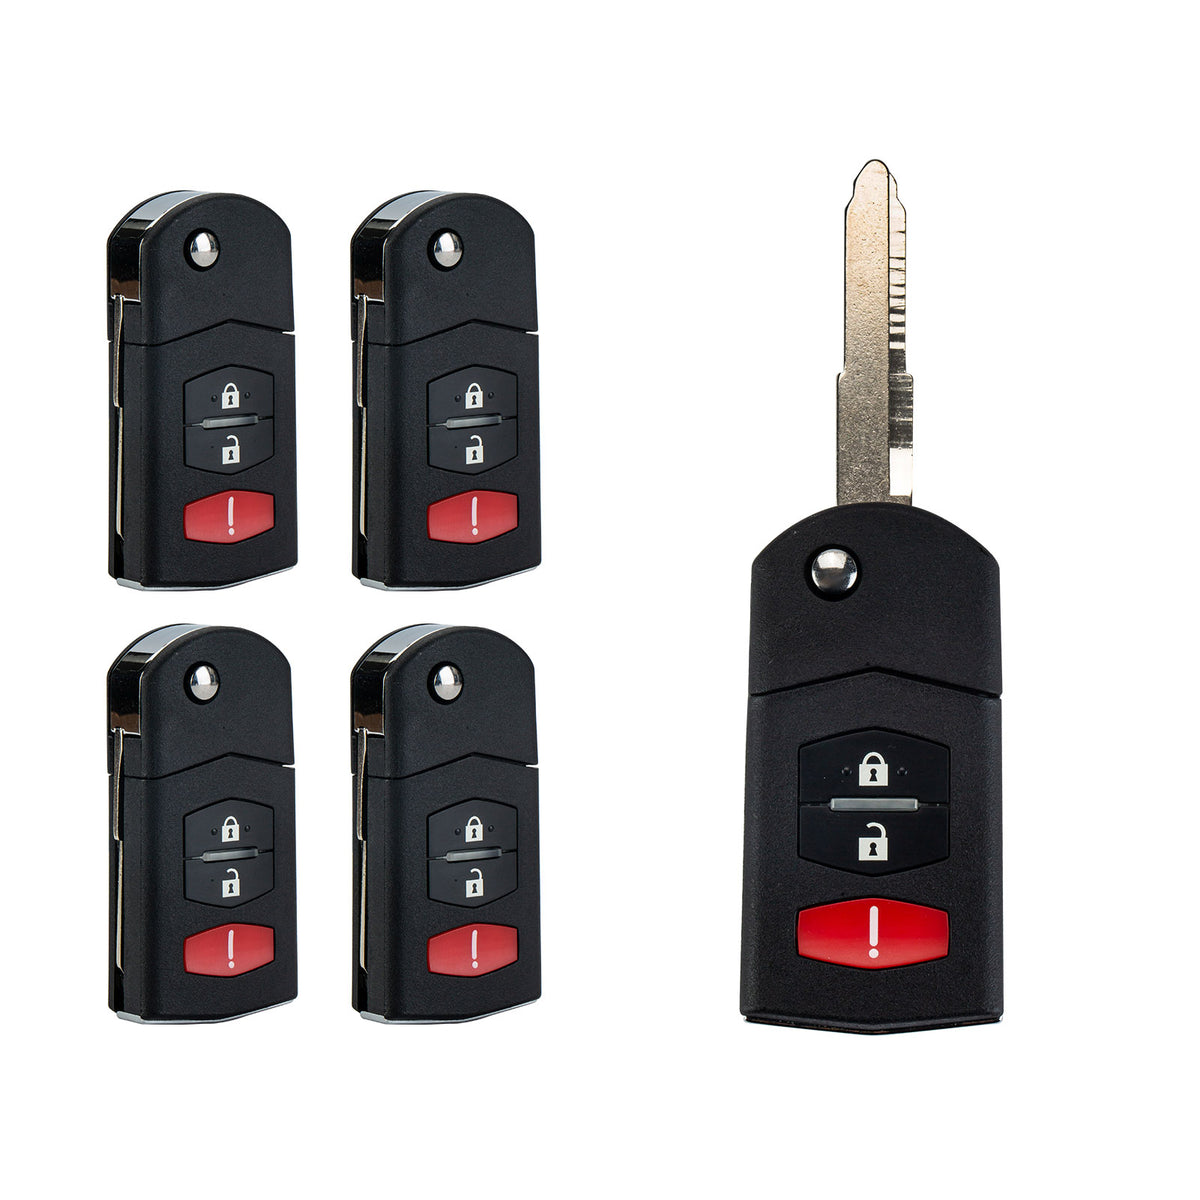 Lots of 5 Remote Car Key Fob Replacement for KPU41788 fits 2005 2006 2007 2008 2009 2010 Mazda 6